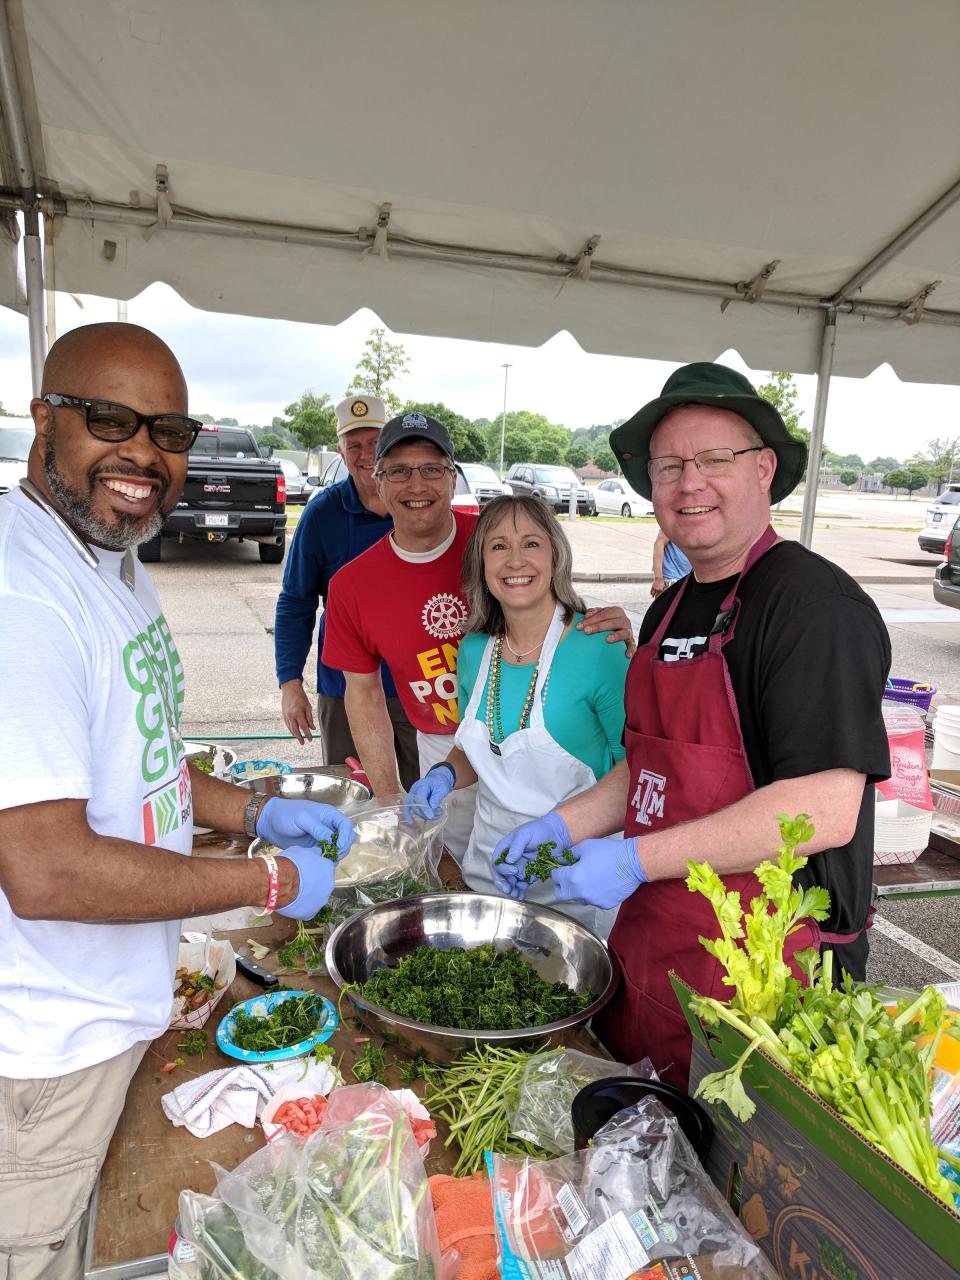 Rotary Club of Memphis volunteers prepare authentic New Orleans Shrimp & Grits and Beignets for their annual Cafe du Monde event.